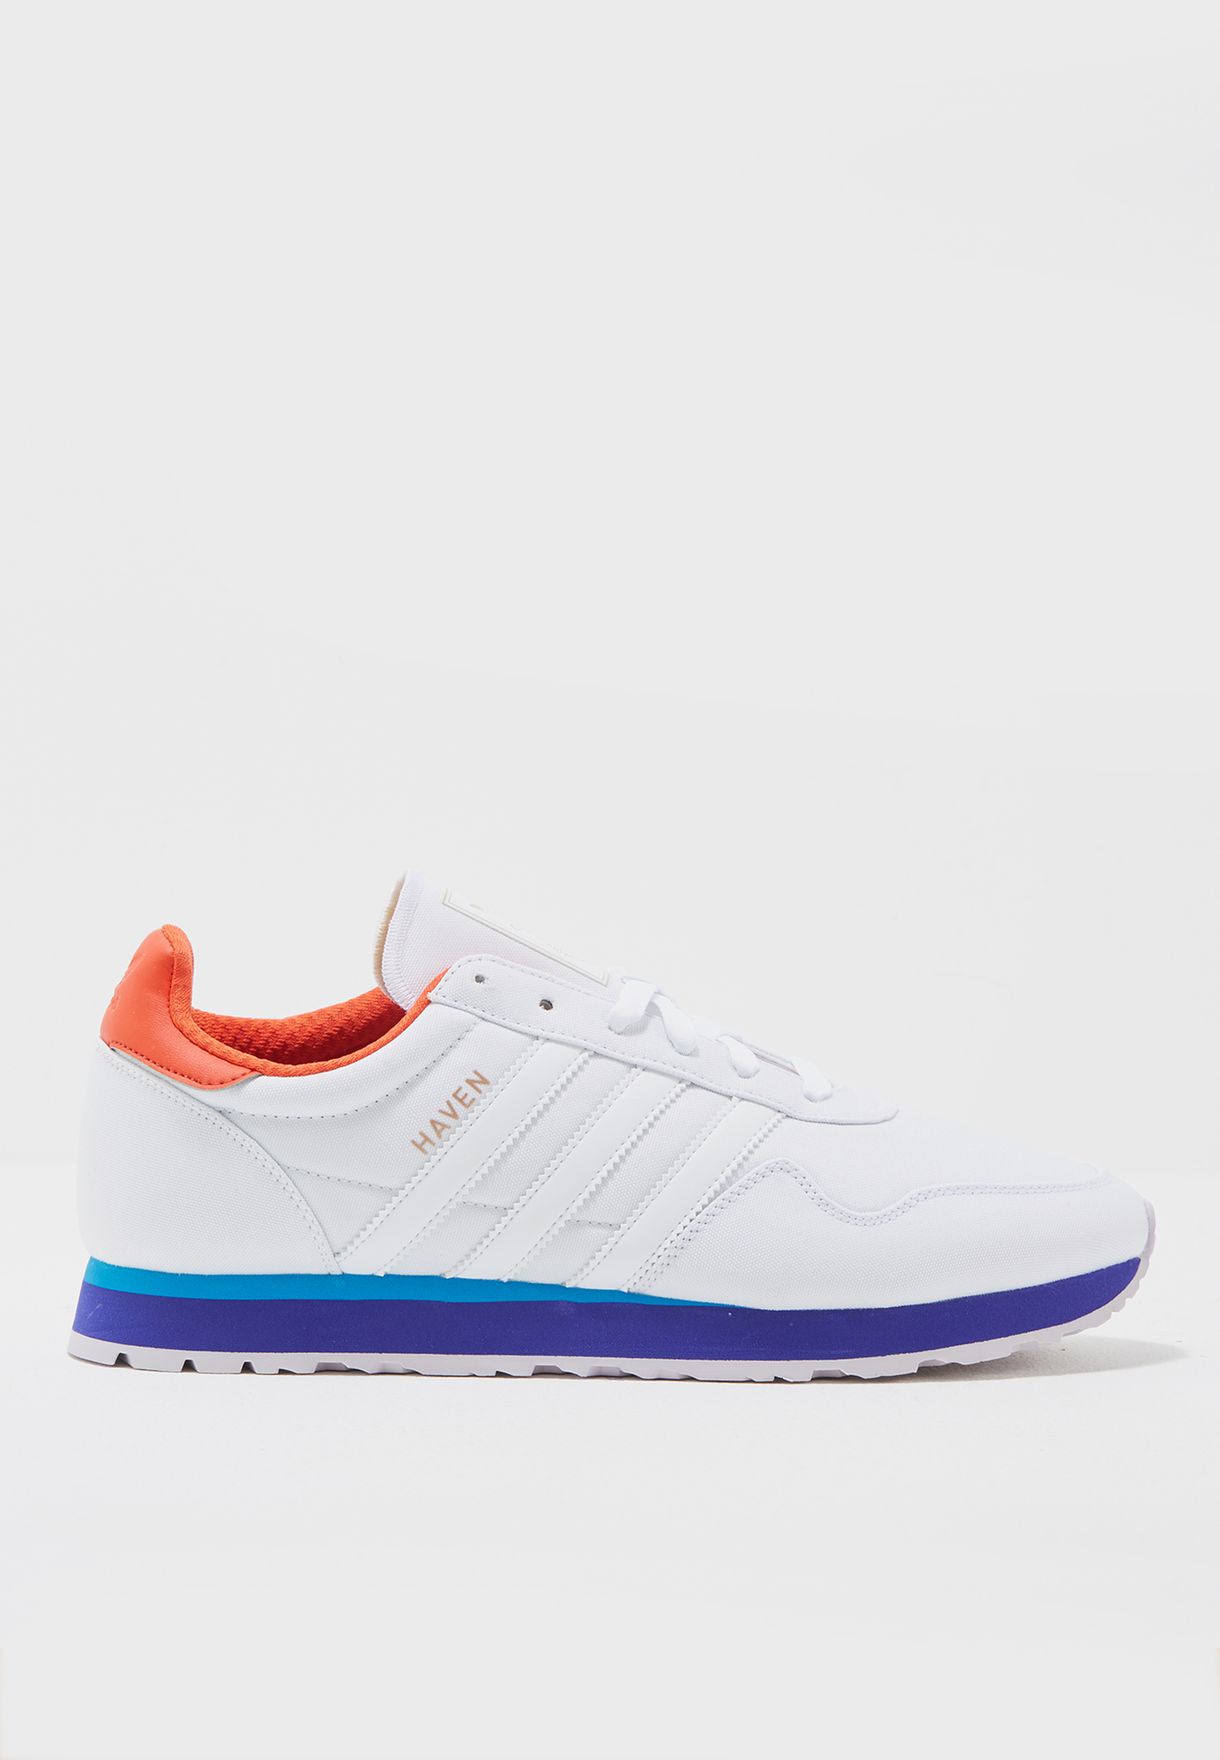 adidas originals haven trainers in white by 9713